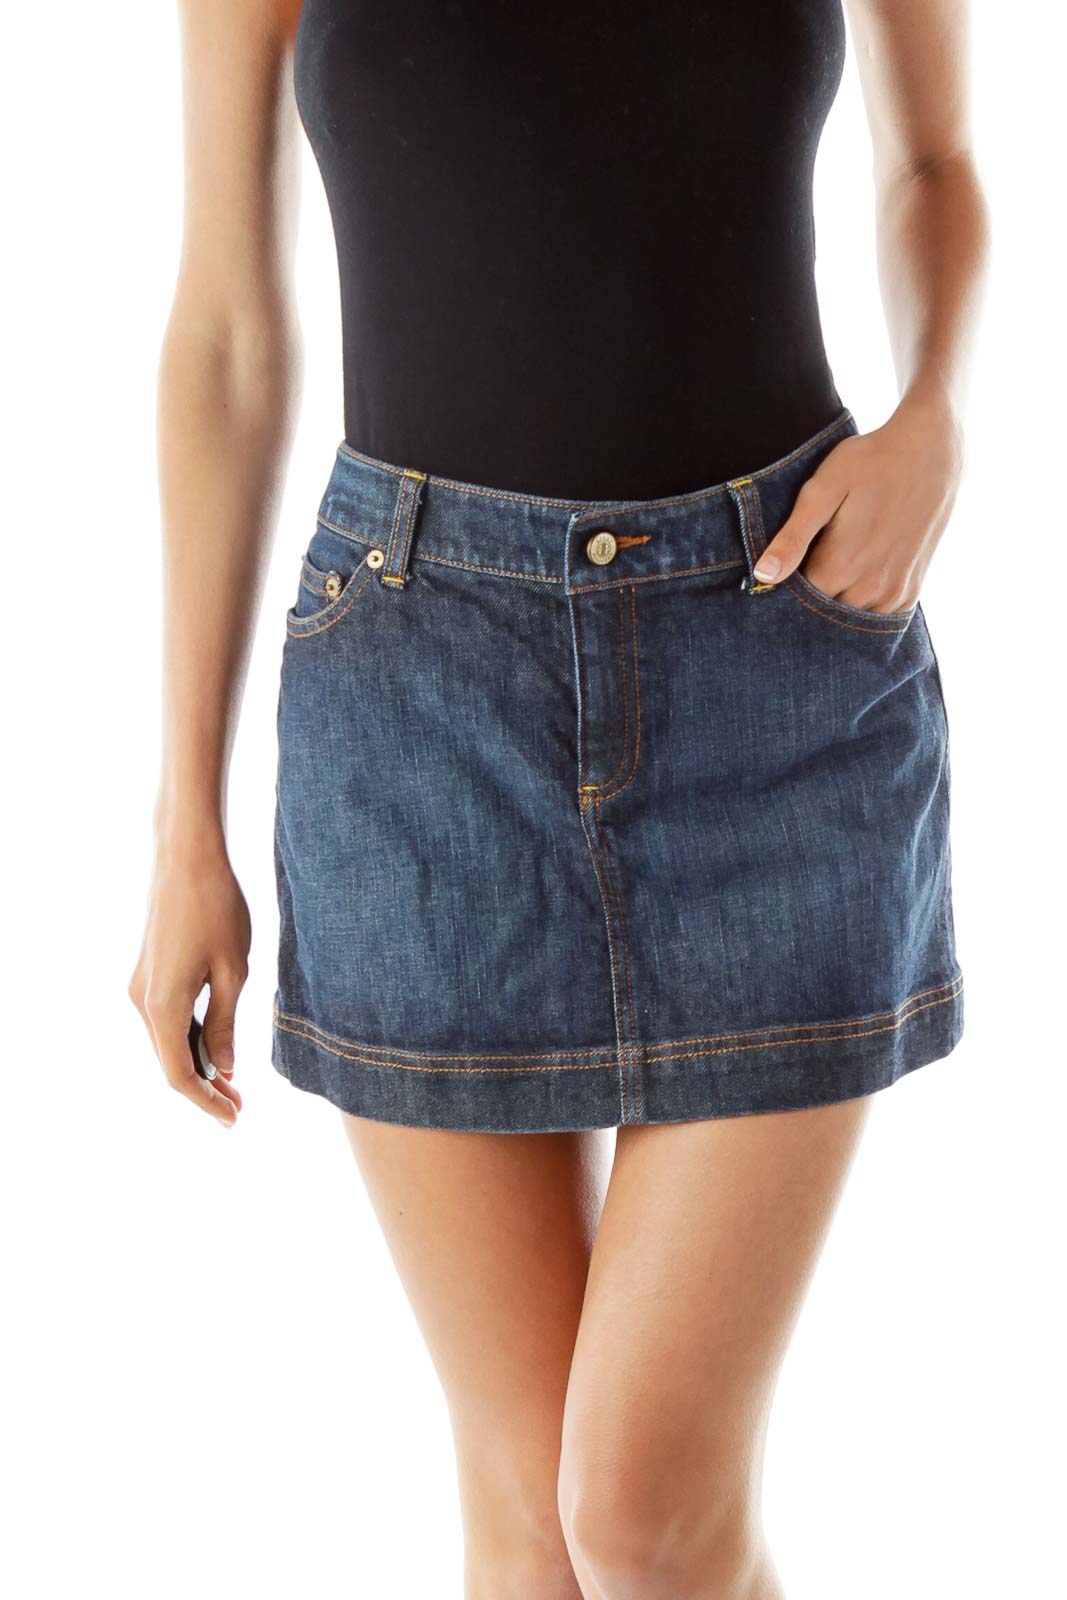 versace blue jeans lilly - 65% OFF 